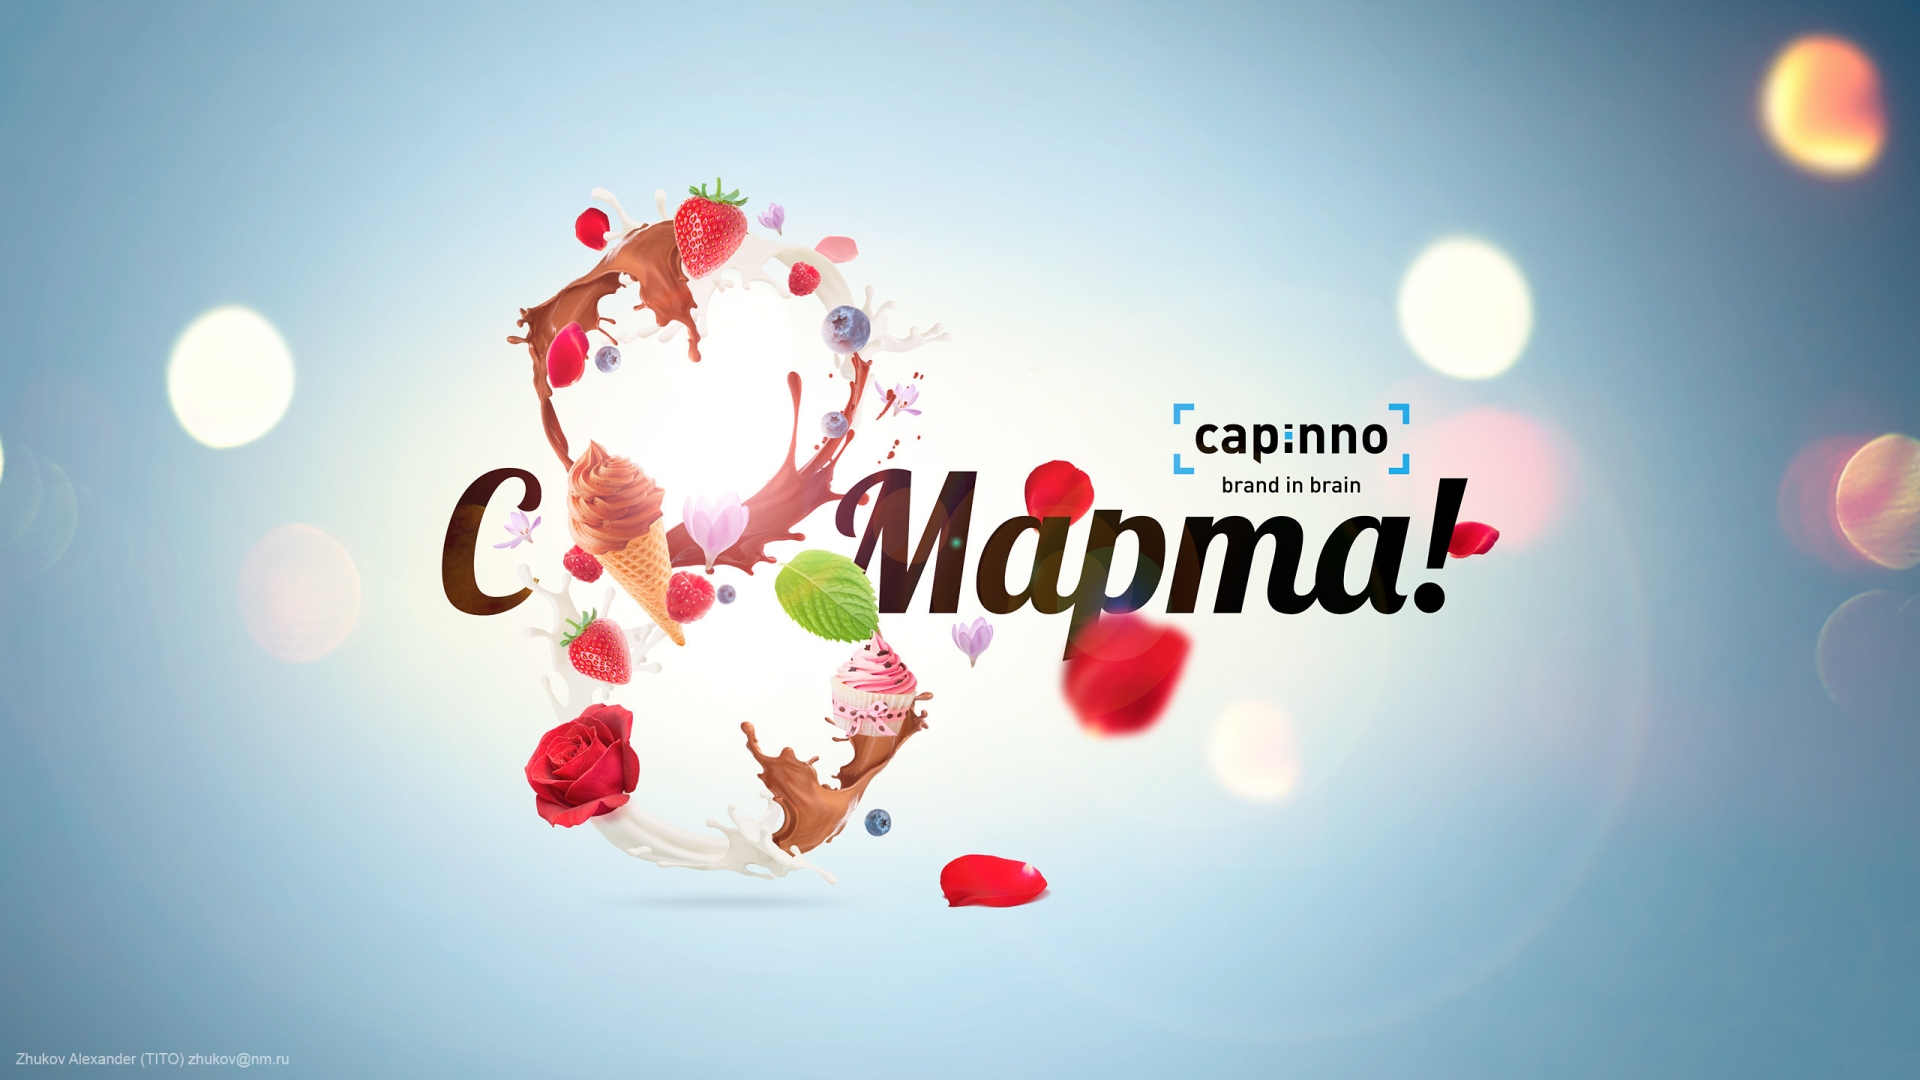 8 March Capinno for 1920 x 1080 HDTV 1080p resolution